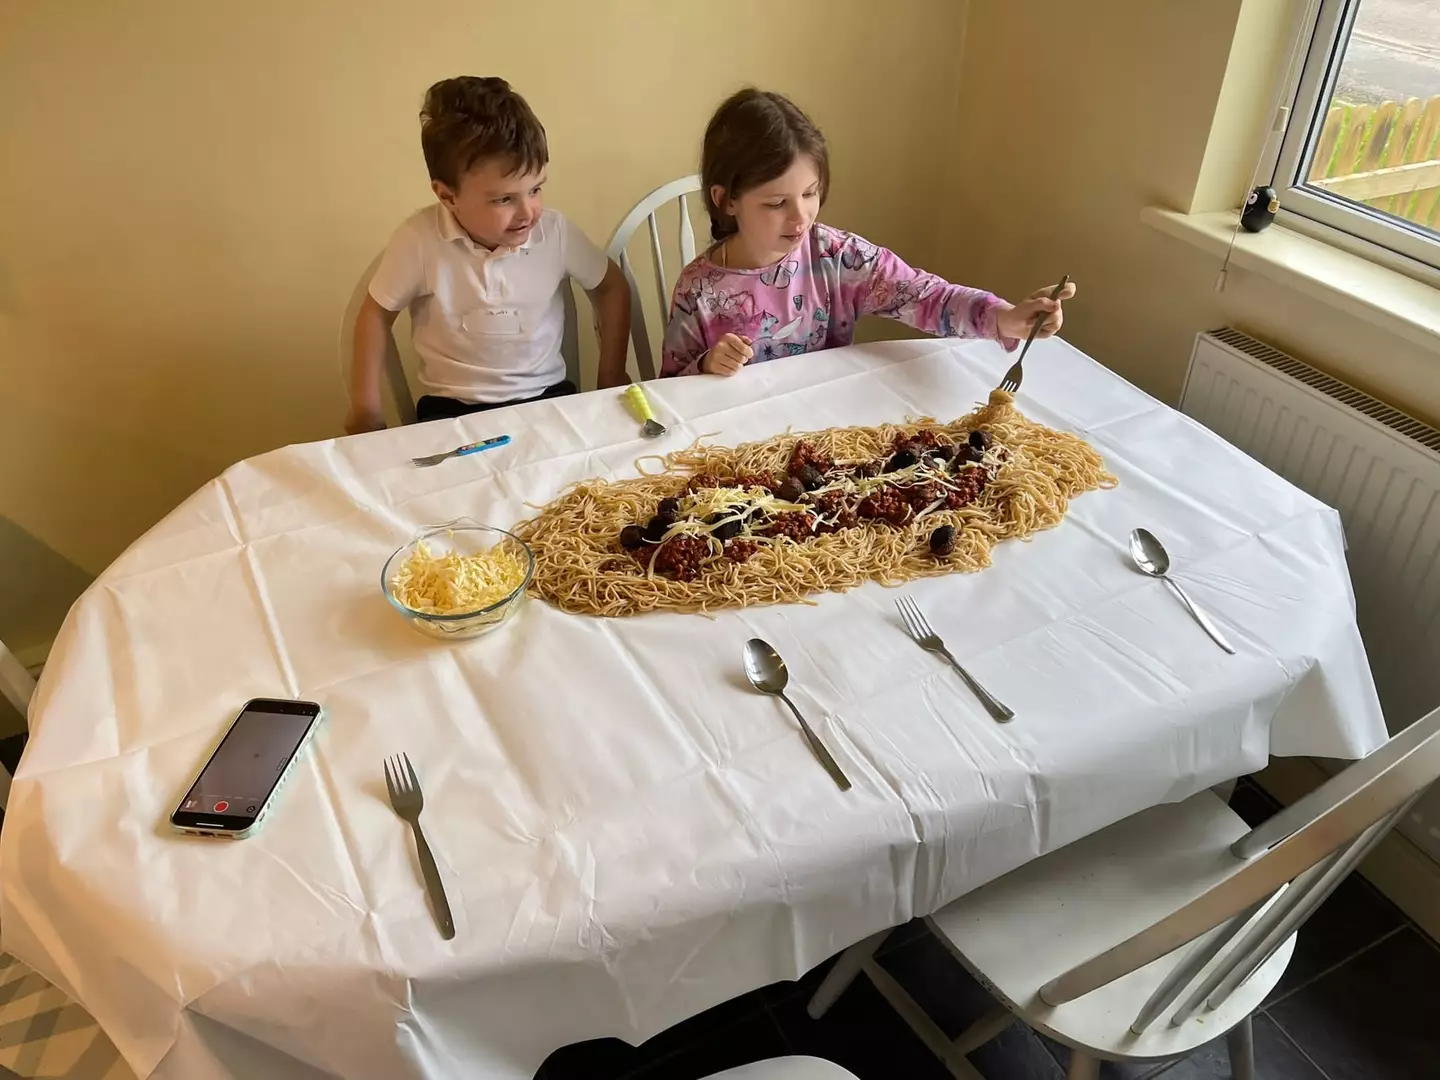 The bizarre dinner arrangement proved to be the ultimate 'no washing up' hack.